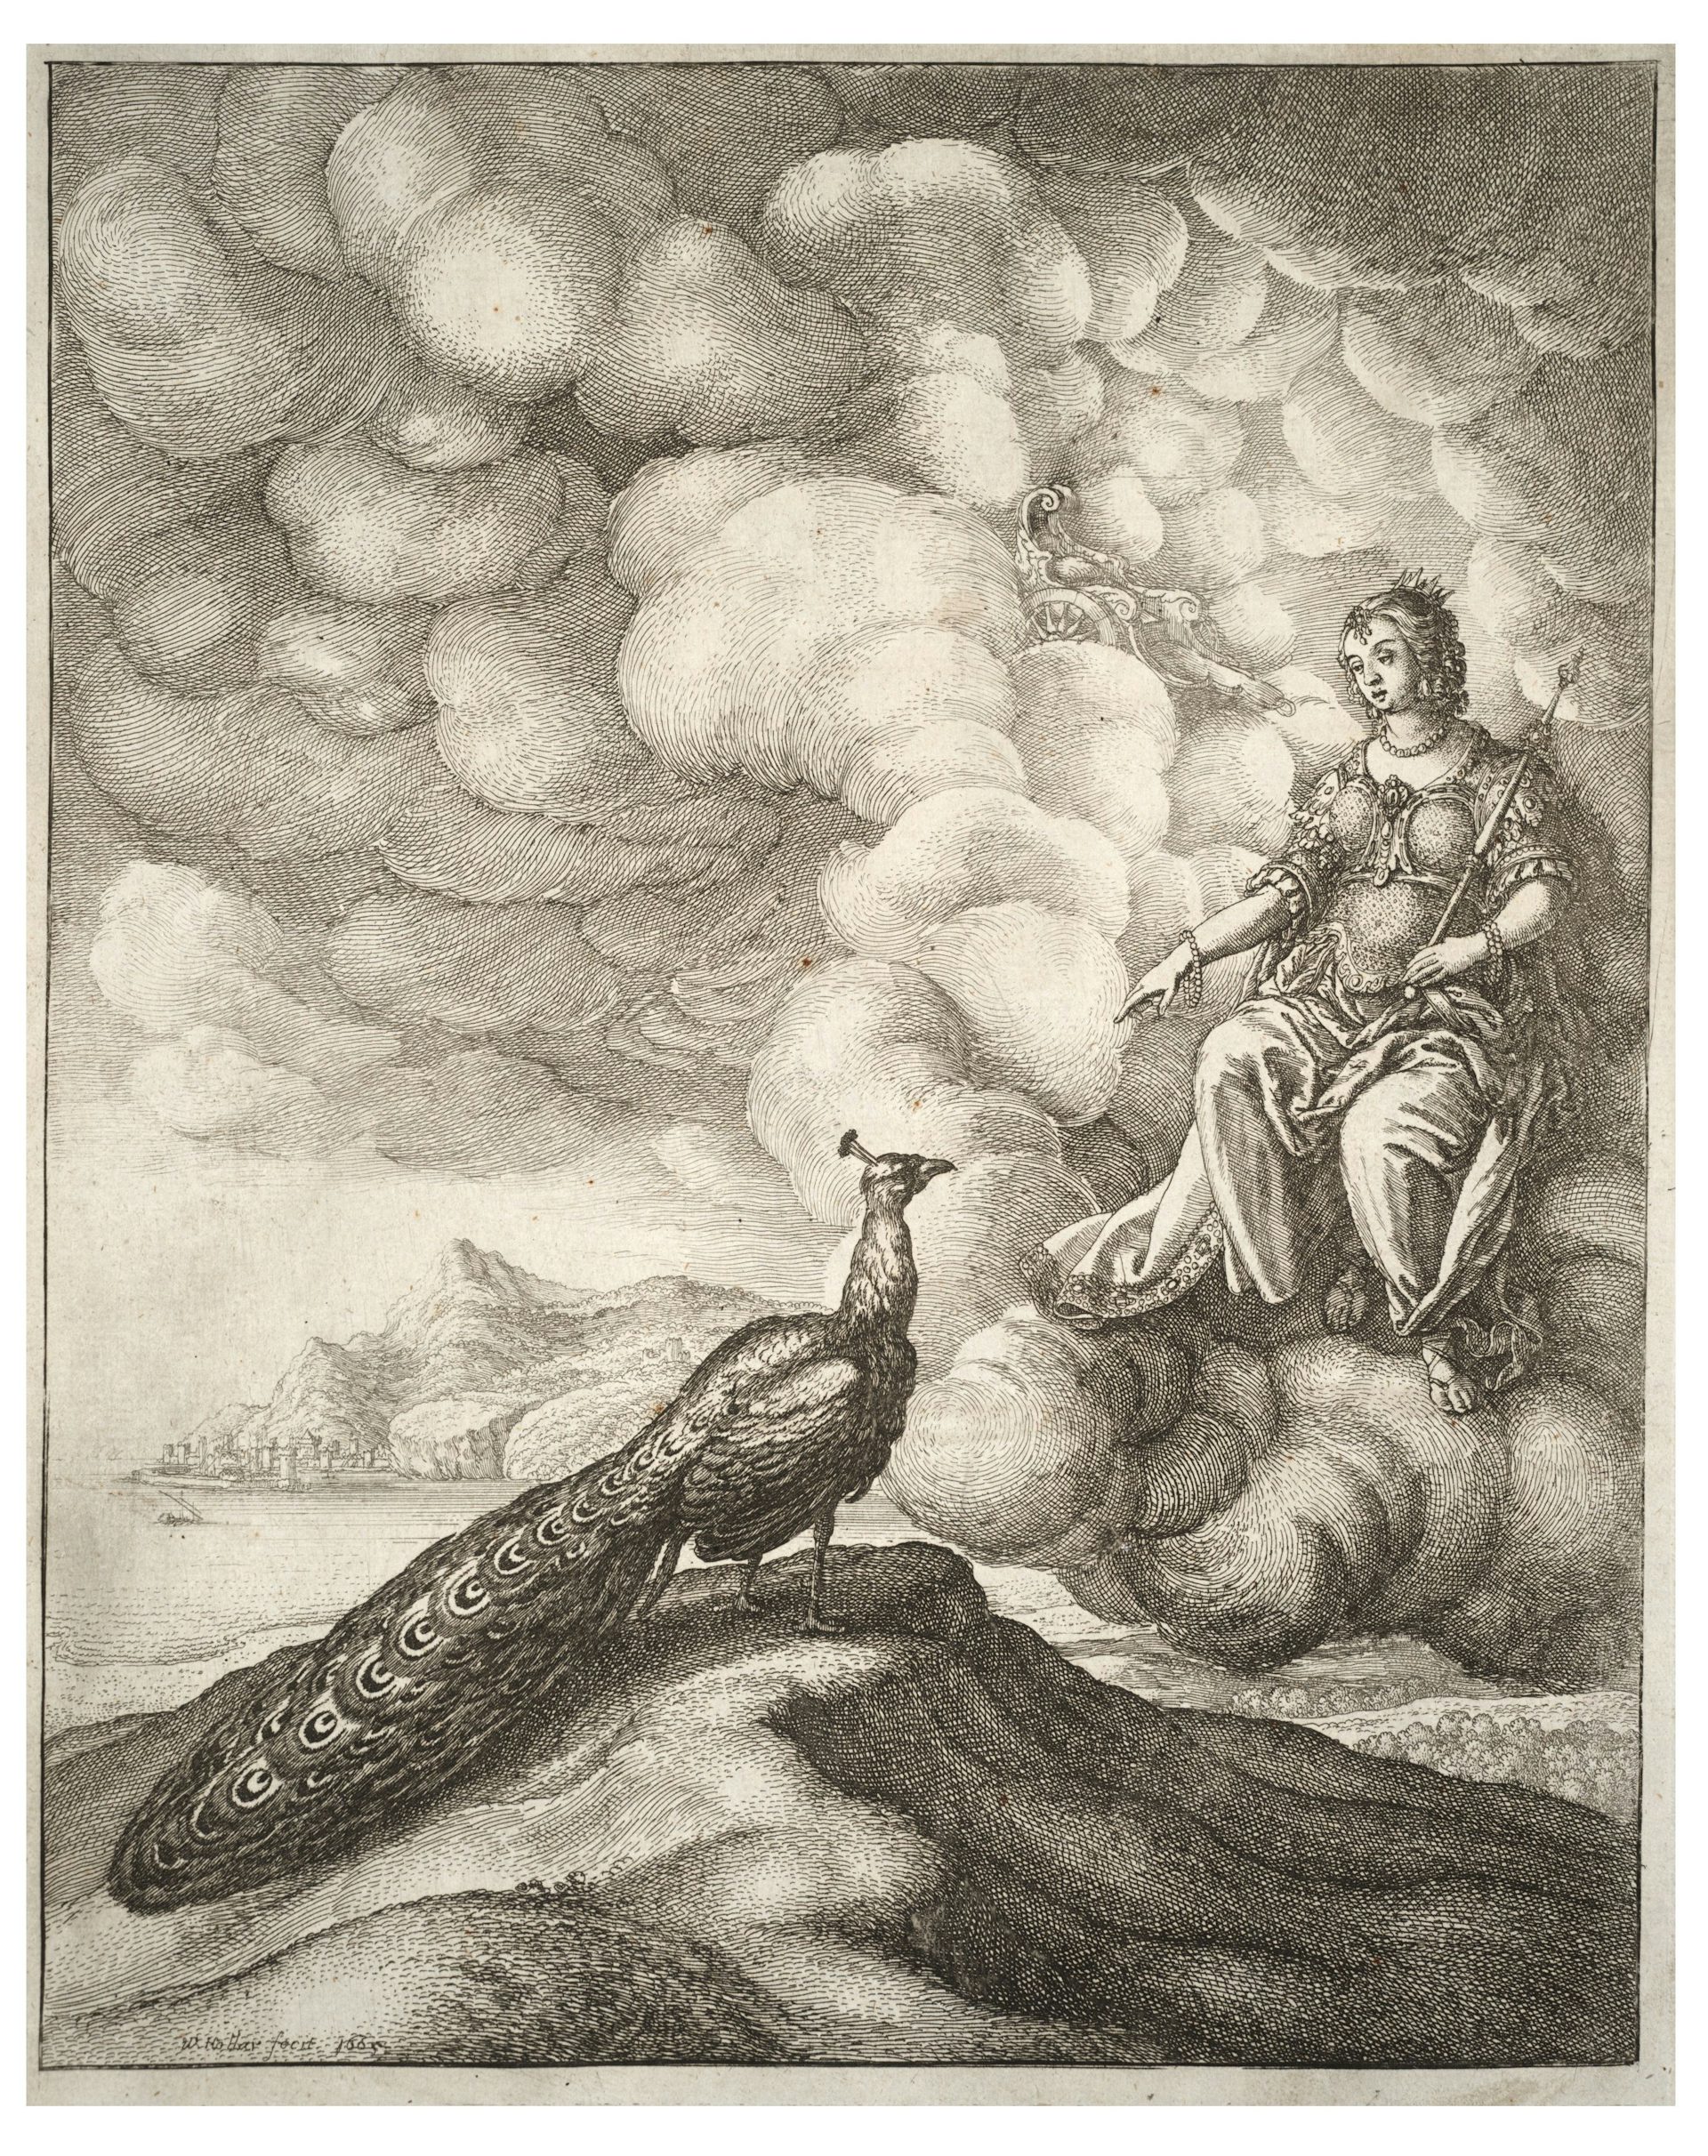 Juno and the Peacock by Wenceslaus Hollar